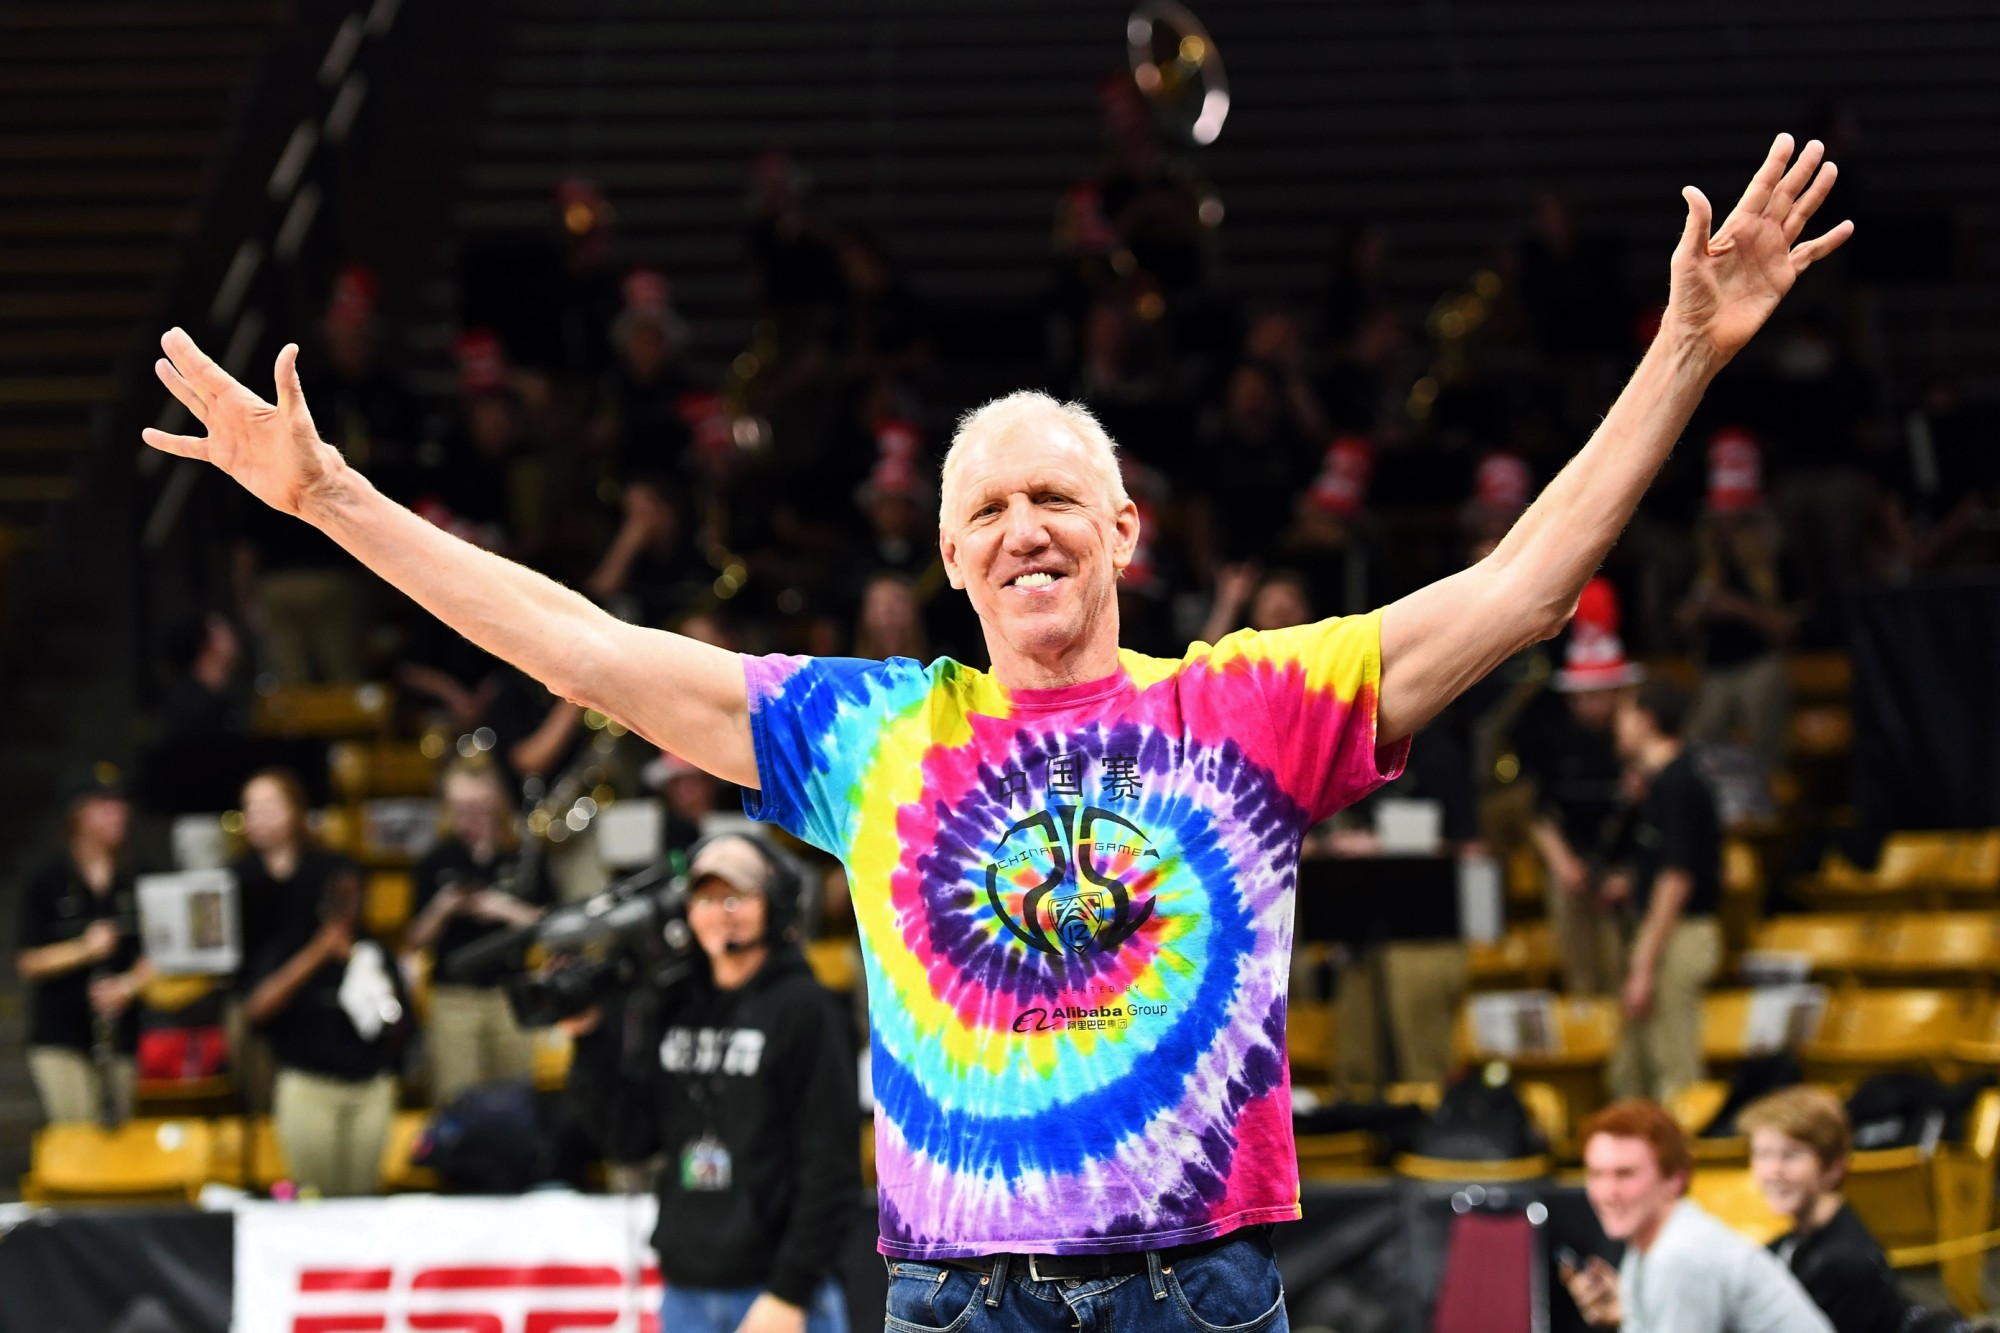 Bill Walton, a Basketball Hall of Famer and one of the game's most celebrated figures, passed away at the age of 71 after a battle with cancer. <br><br>This photo essay celebrates the life and career of a man who was never afraid to be himself, both on and off the court. From his time as a two-time NCAA champion at UCLA under coach John Wooden to his NBA career with the Portland Trail Blazers, San Diego/Los Angeles Clippers, and Boston Celtics, Walton's impact on the game was immeasurable. <br><br>Though his playing career was cut short by chronic foot injuries, he found success as a broadcaster, winning an Emmy and being named one of the top 50 sports broadcasters of all time. <br><br>Walton's larger-than-life personality and deep passion for the causes that mattered most to him made him a truly unique figure in the world of basketball and beyond.